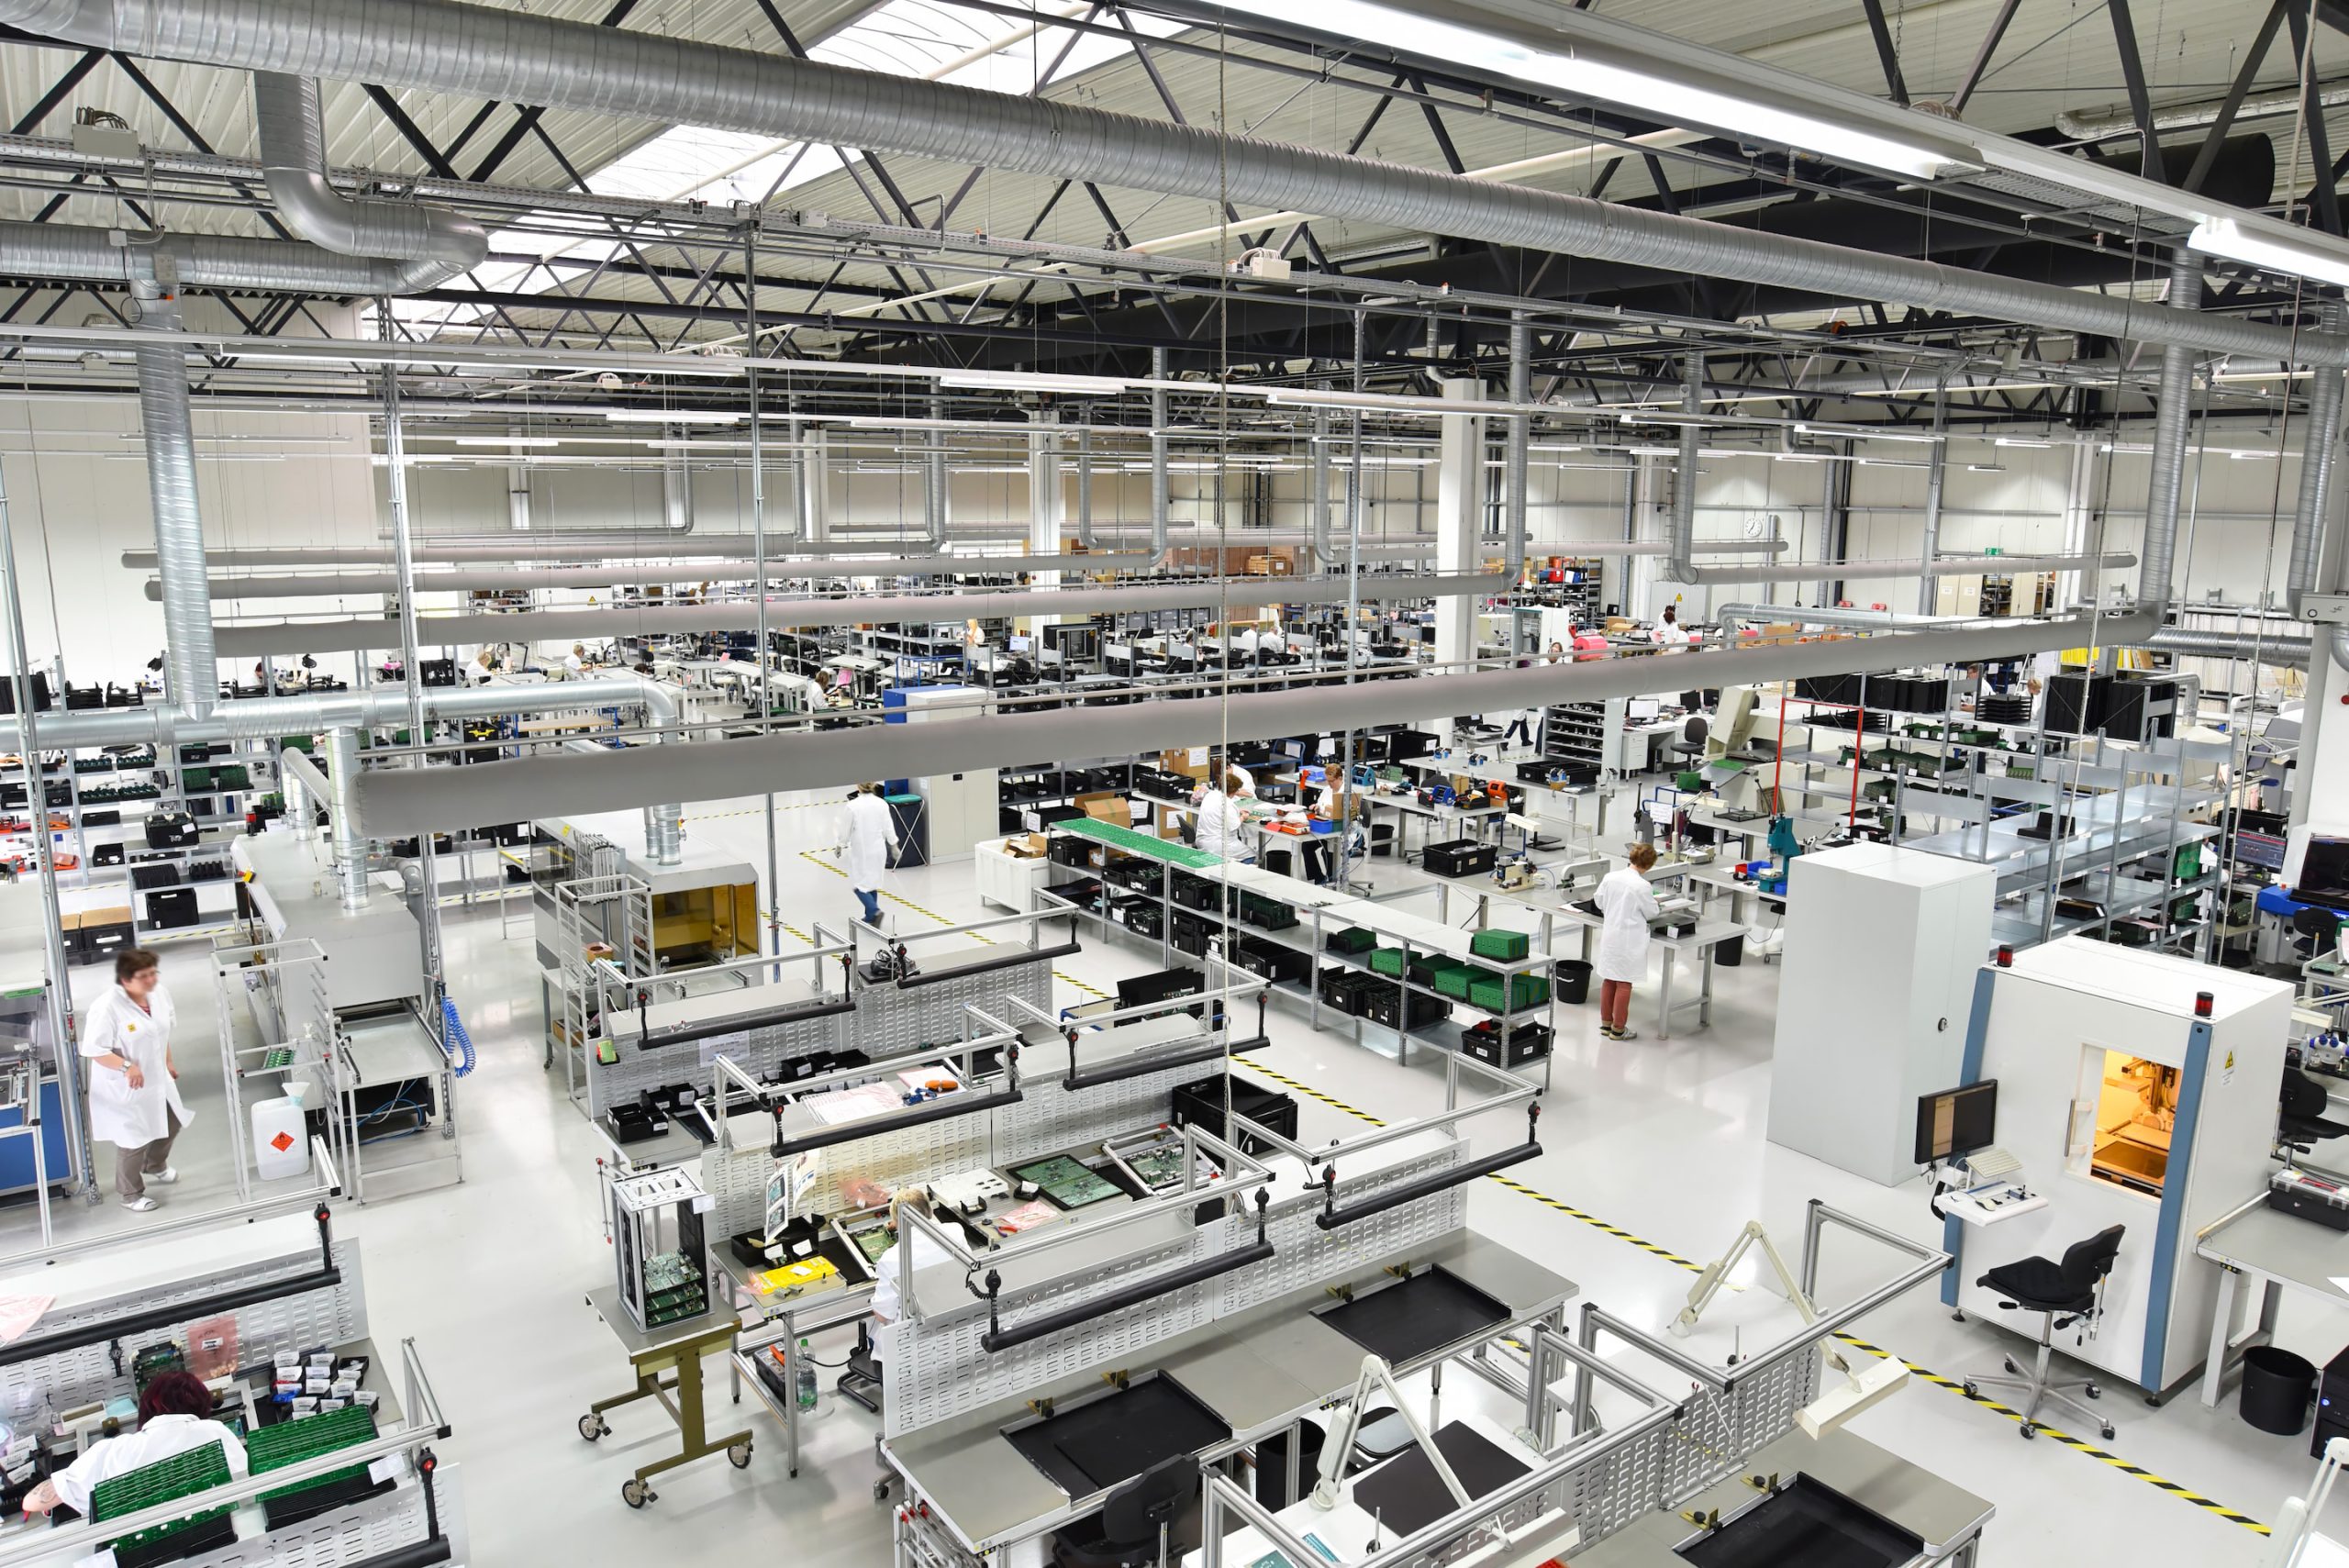 Wide angle image of large IoT manufacturing factory with lots of machines.